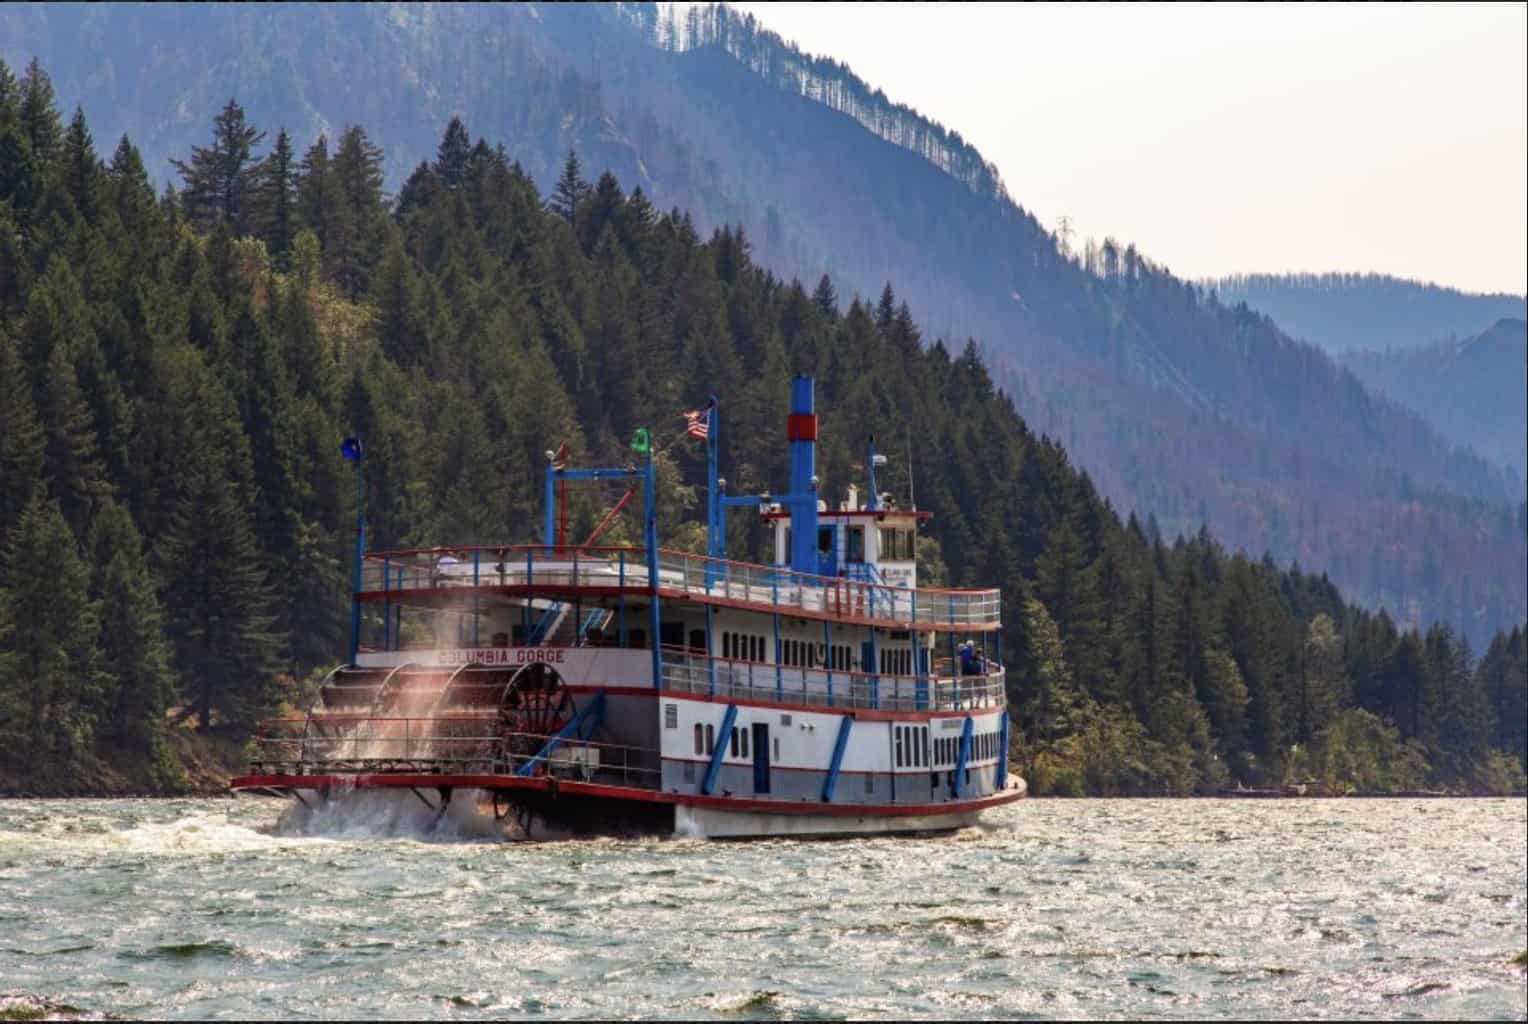 Columbia River Gorge Dinner Cruise